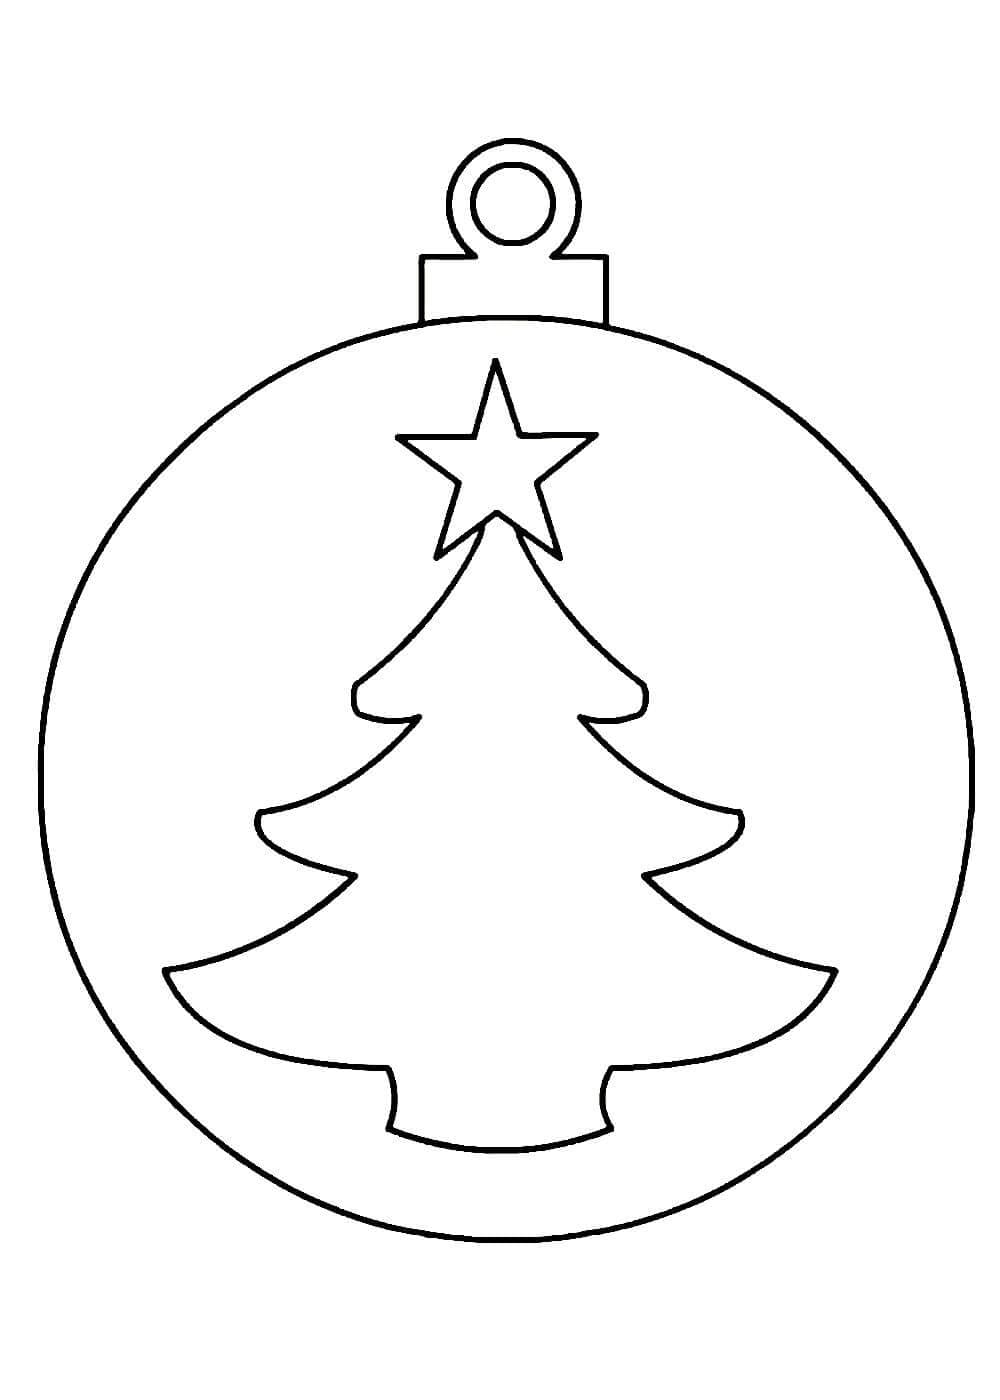 Toddler Christmas Coloring Pages | WONDER DAY — Coloring pages for ...